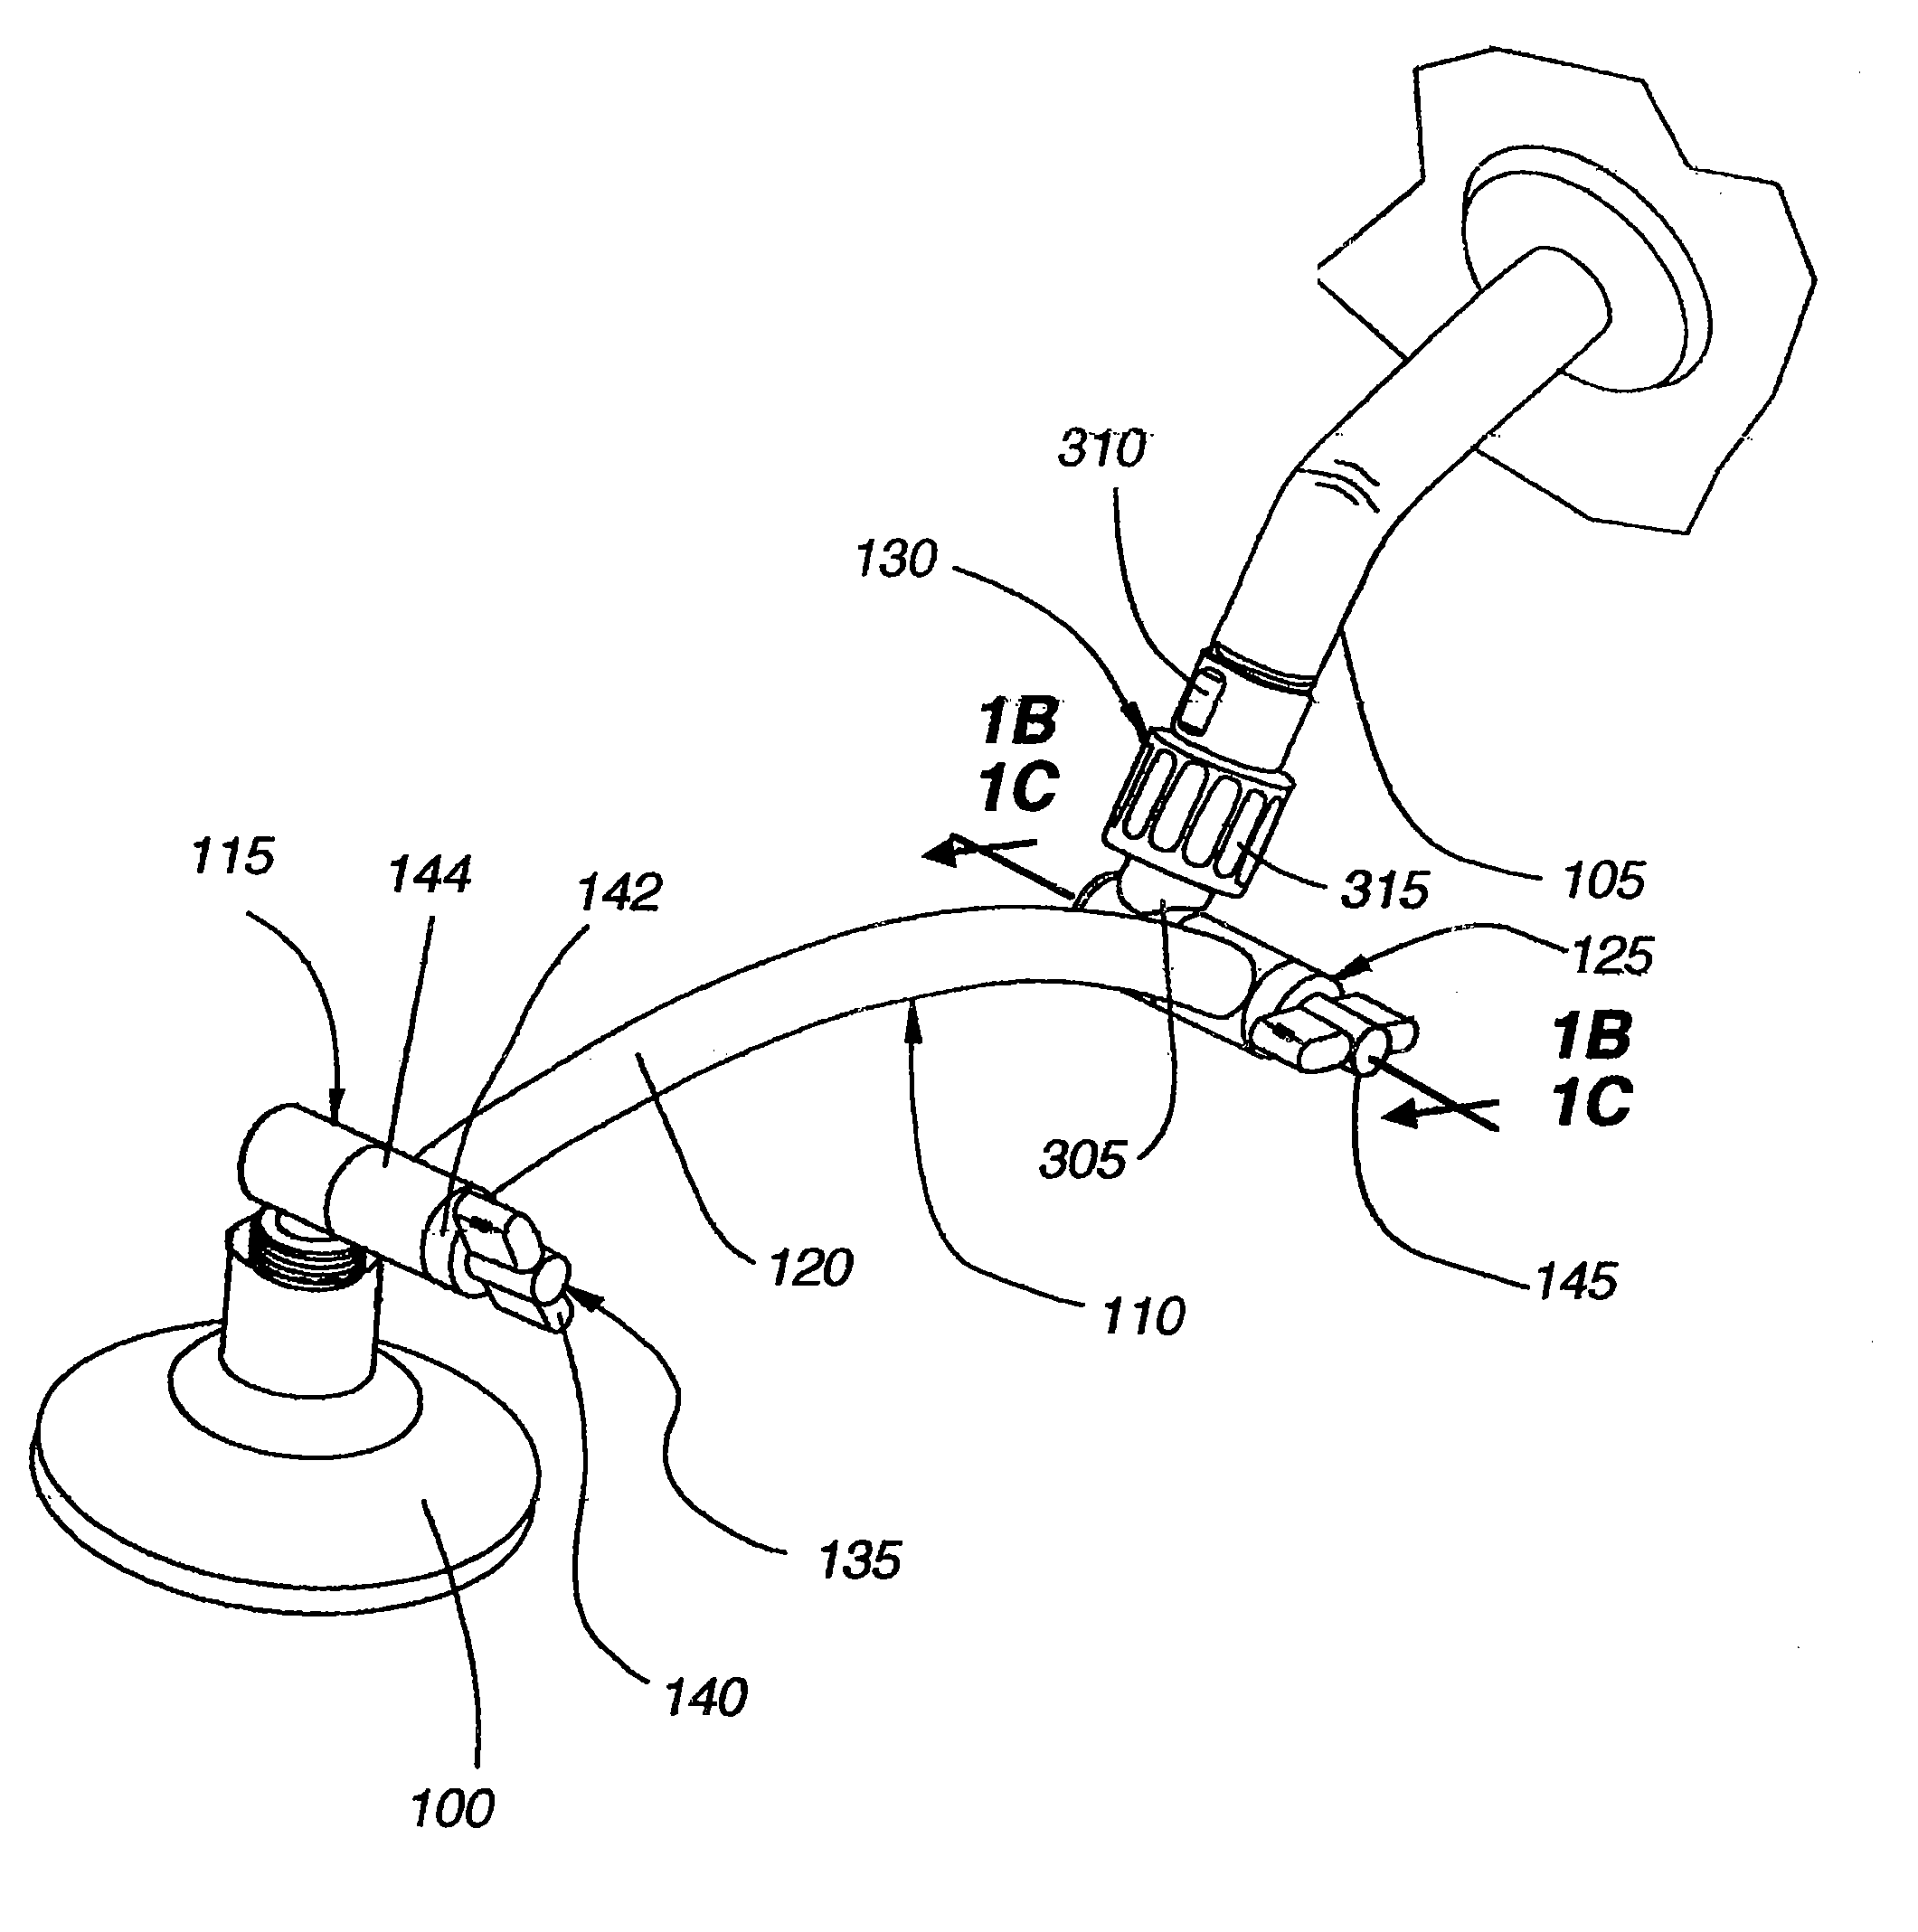 Showerhead attachment assembly